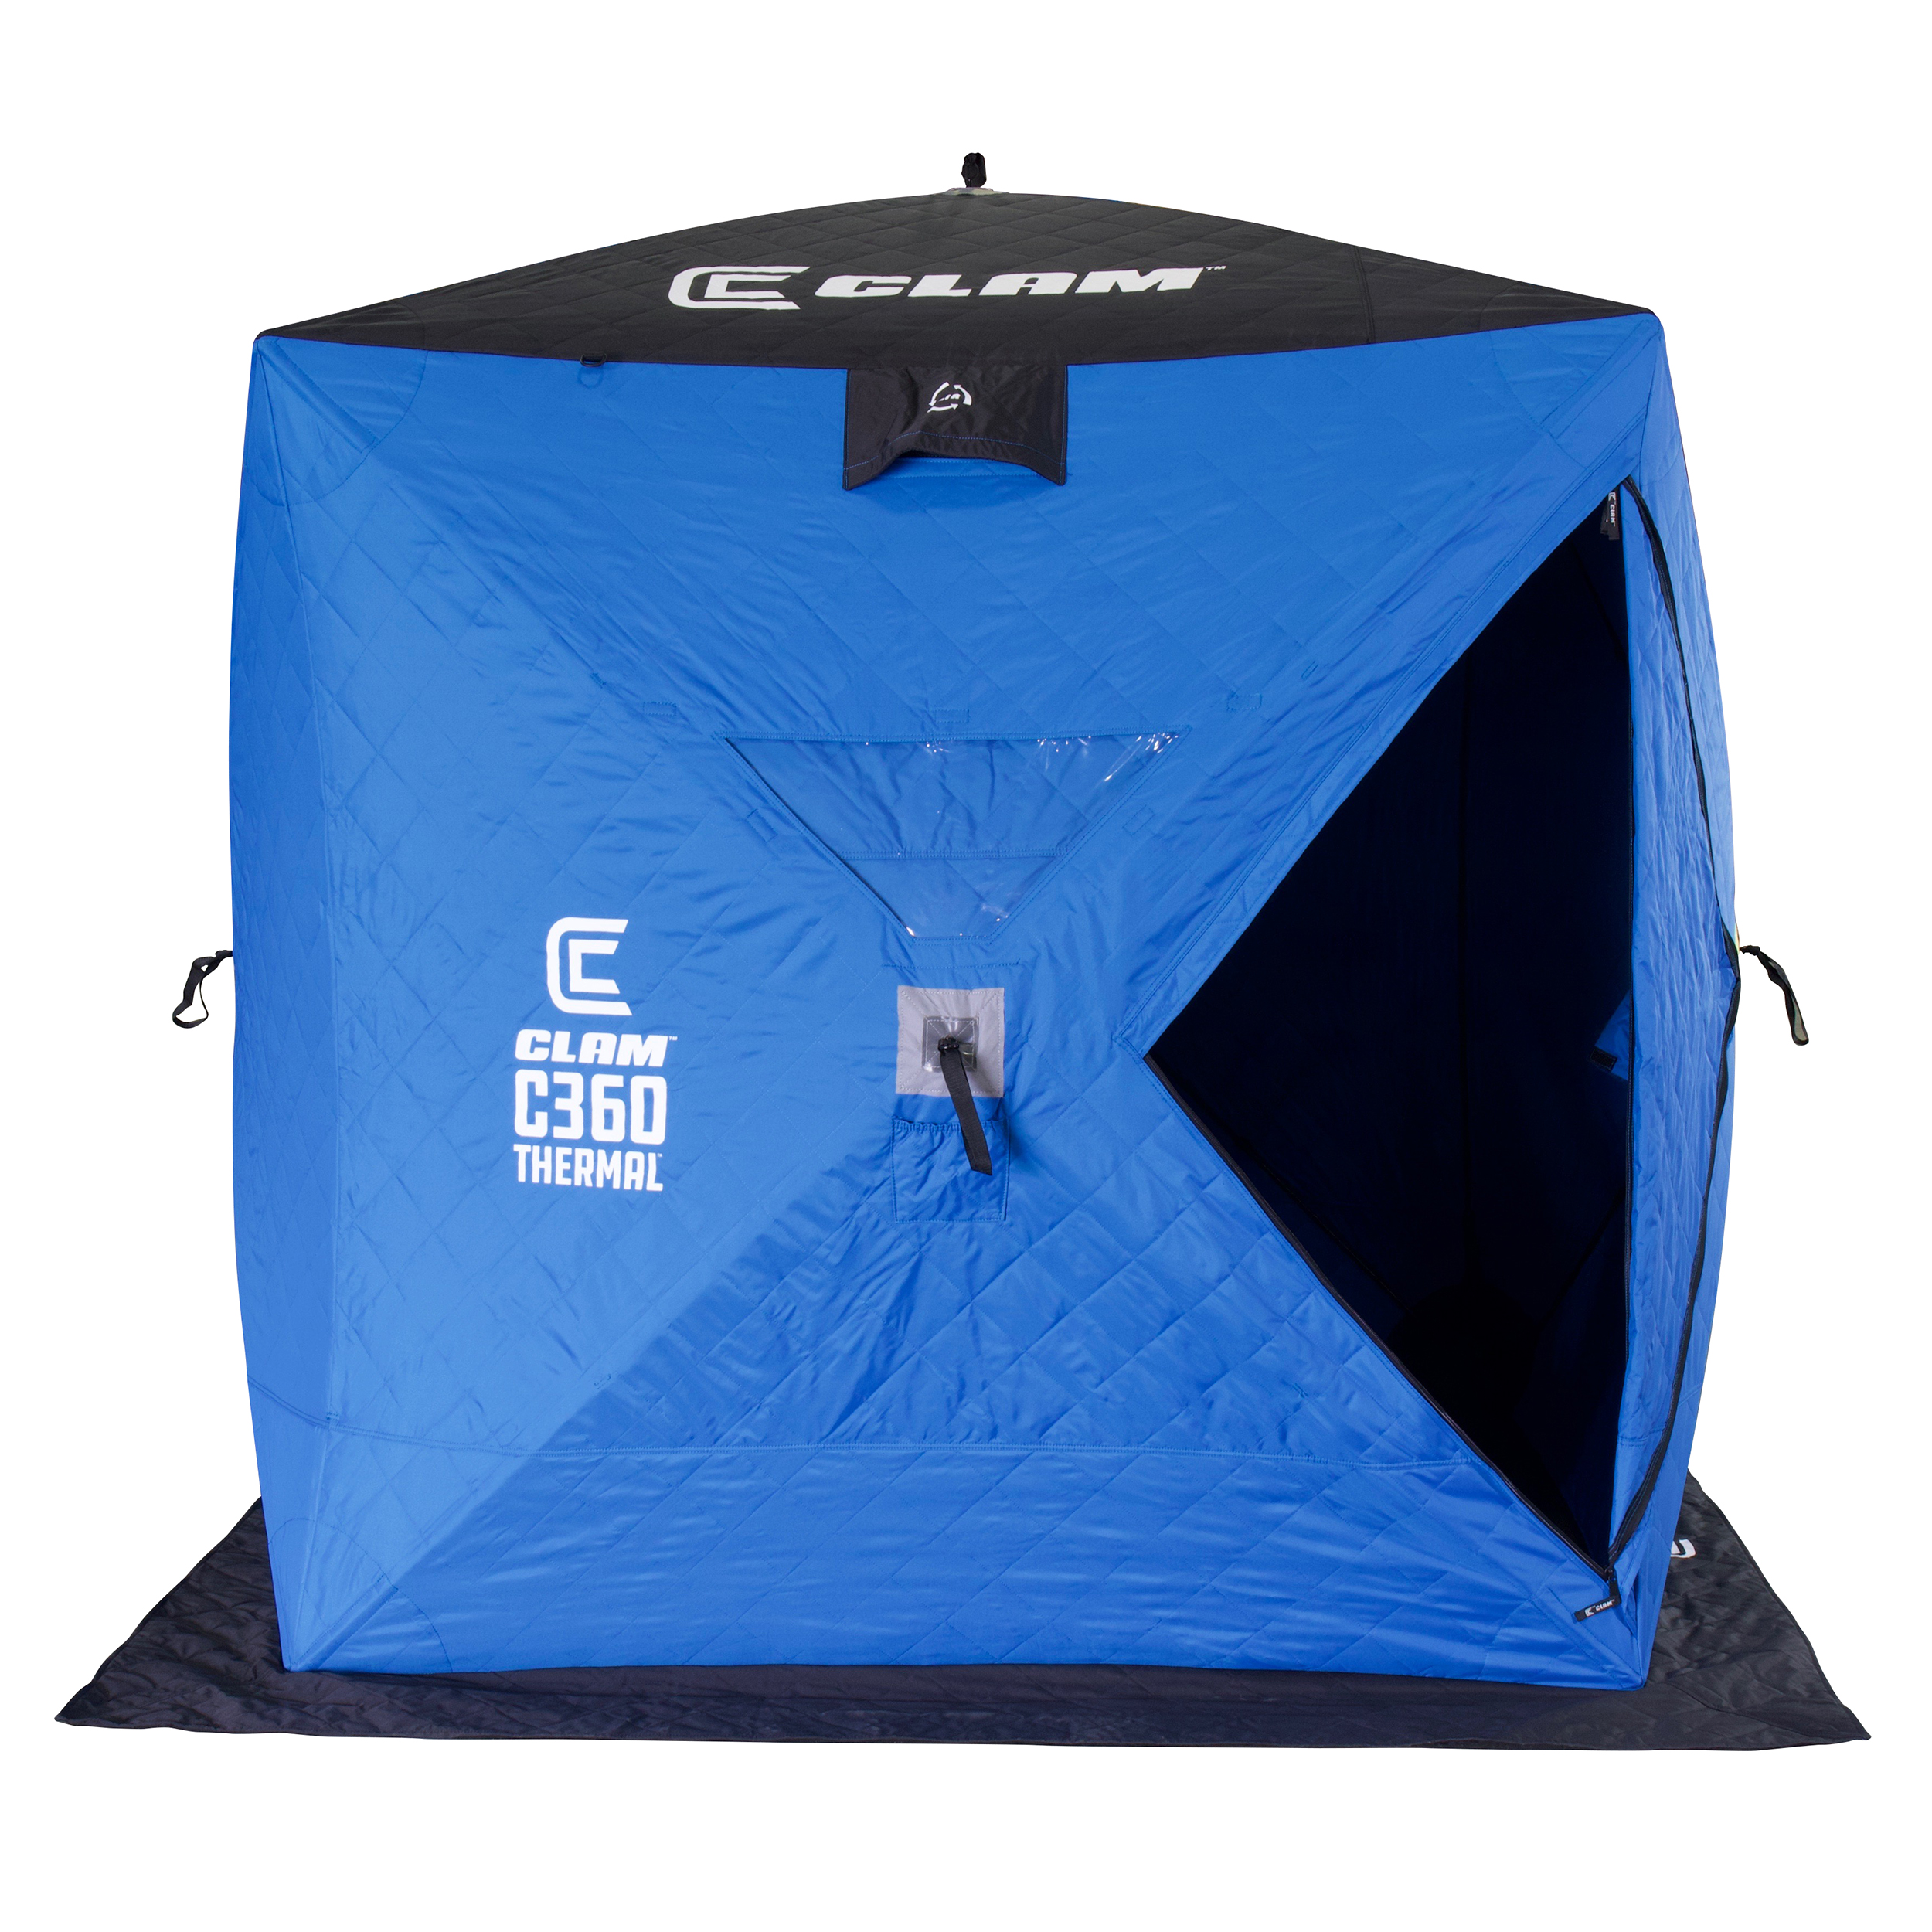 Clam C-360 Thermal Hub Shelter - Dick Smith's Live Bait & Tackle